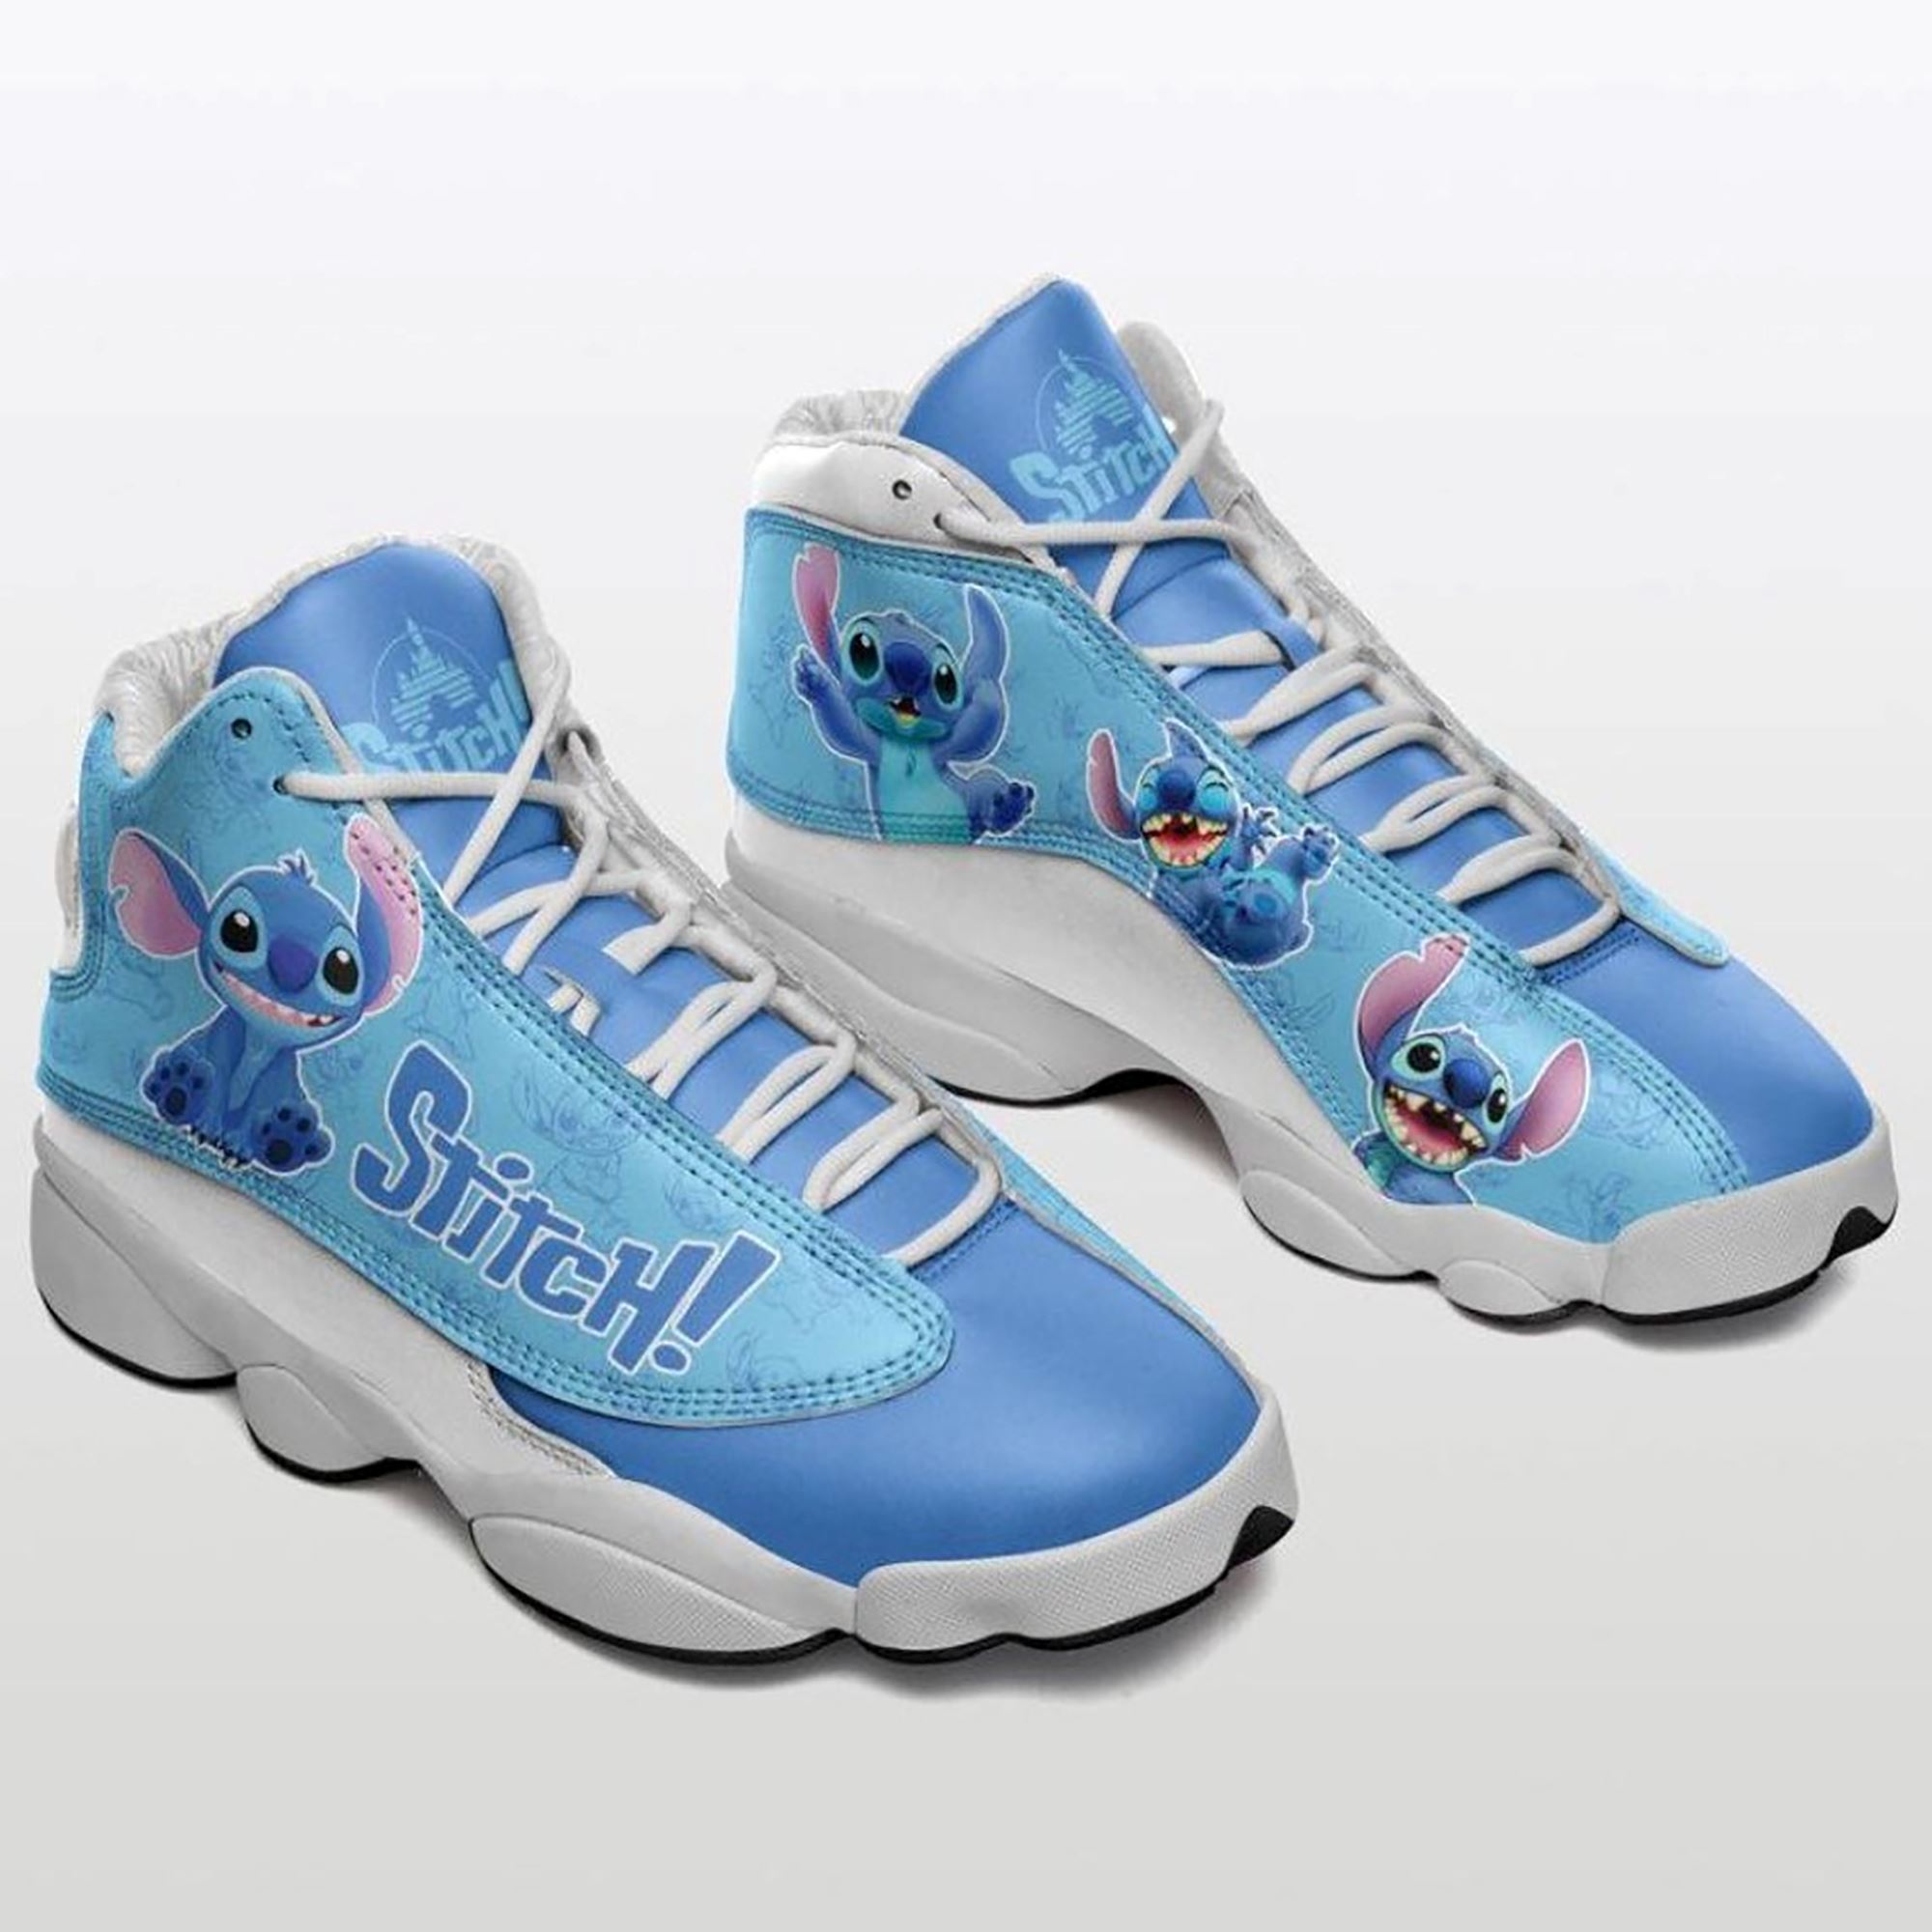 Stitch Air Jordan 13 Shoes Stitch Leather Shoes Disney Stitch Lover Shoes Stitch Sport Shoes Shoes For Stitch Lover Disney Fans Gift